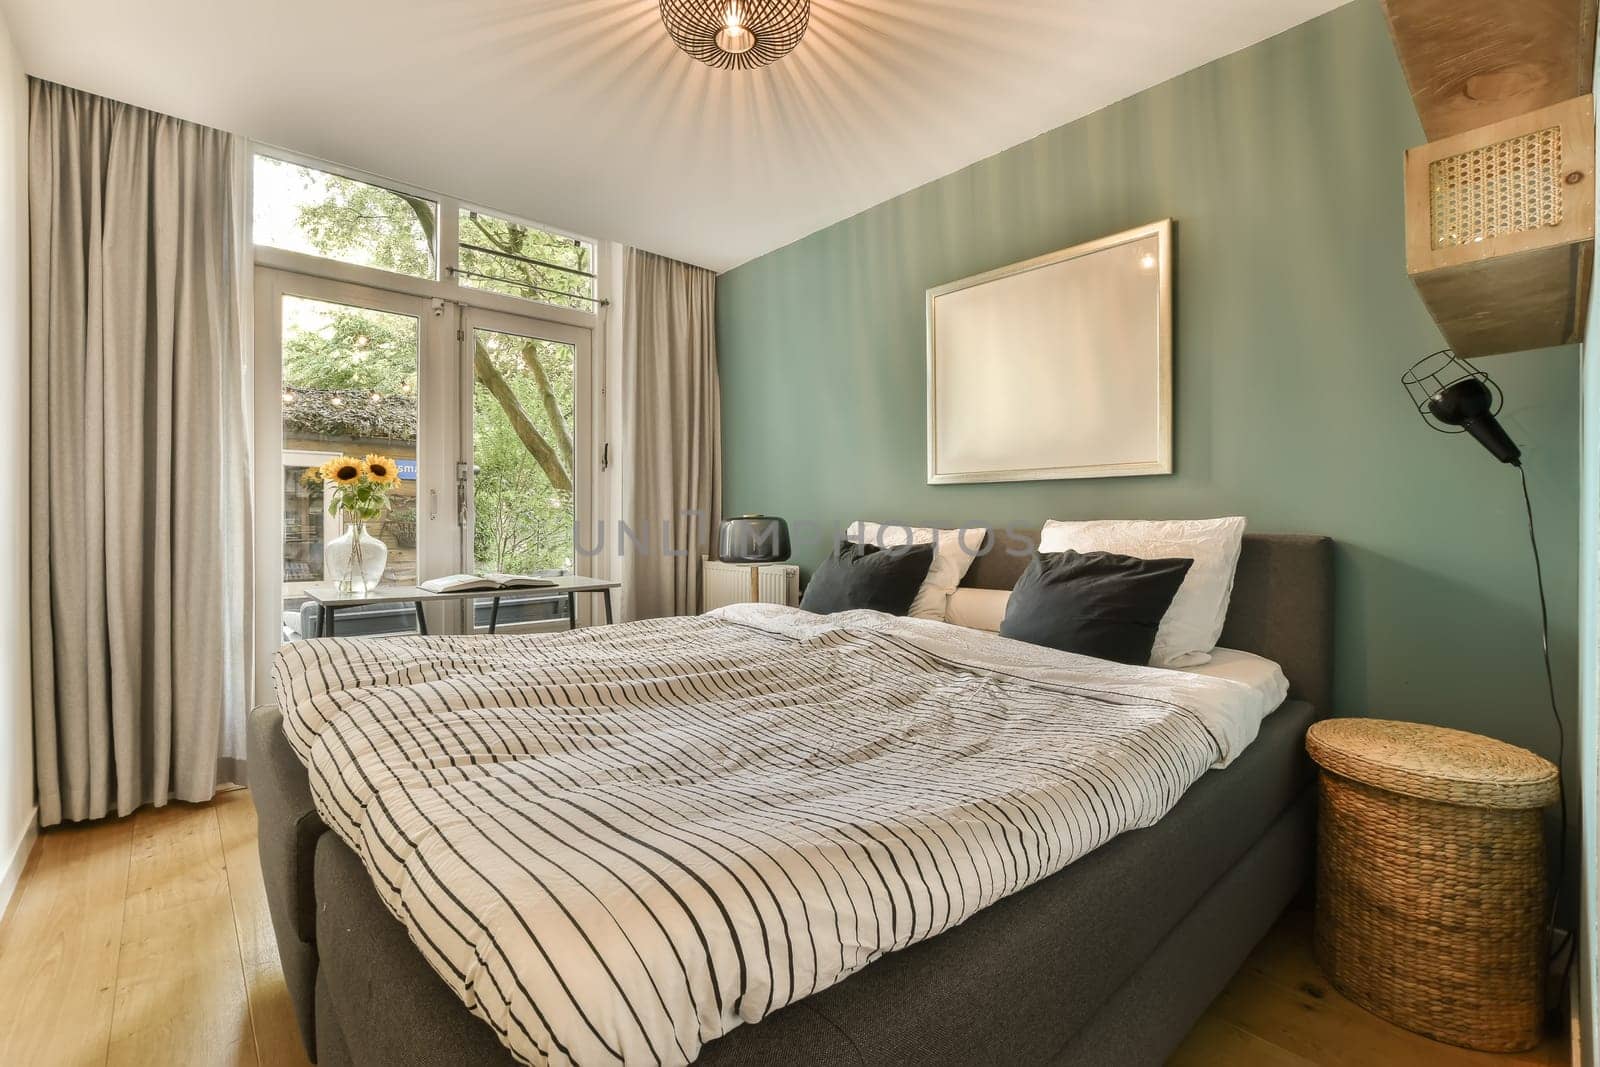 a bedroom with green walls and wood flooring the room has a large bed in it is surrounded by two windows